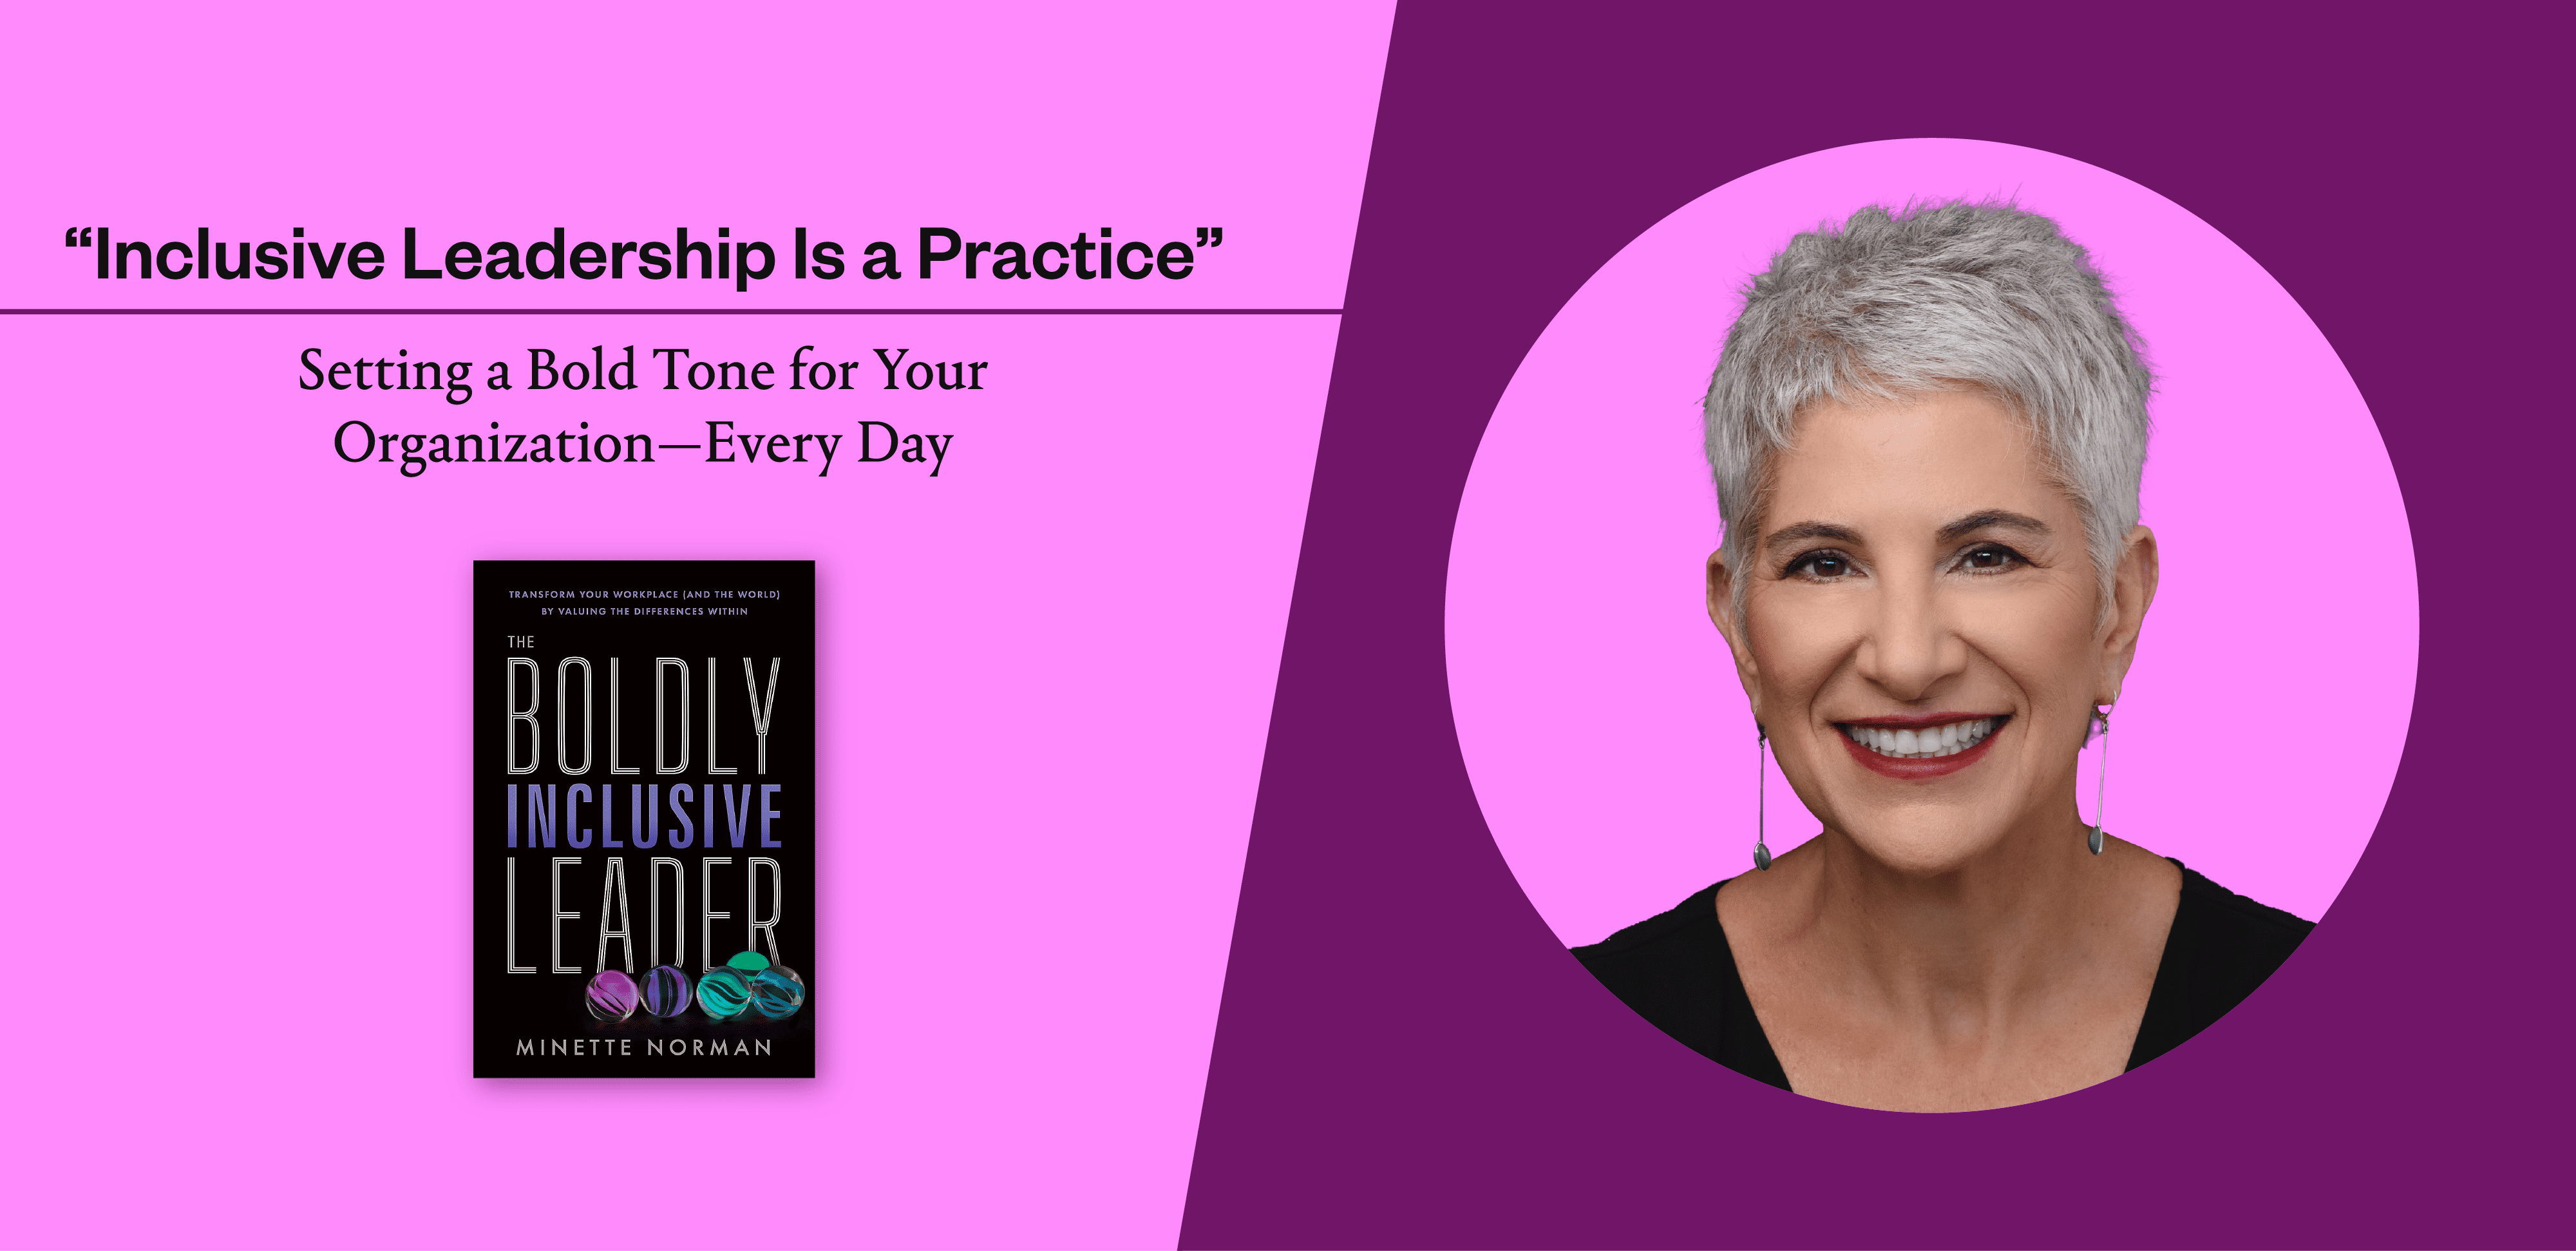 “Inclusive Leadership Is a Practice”: Daily Steps for Transforming Your Company Culture, from Minette Norman’s New Book